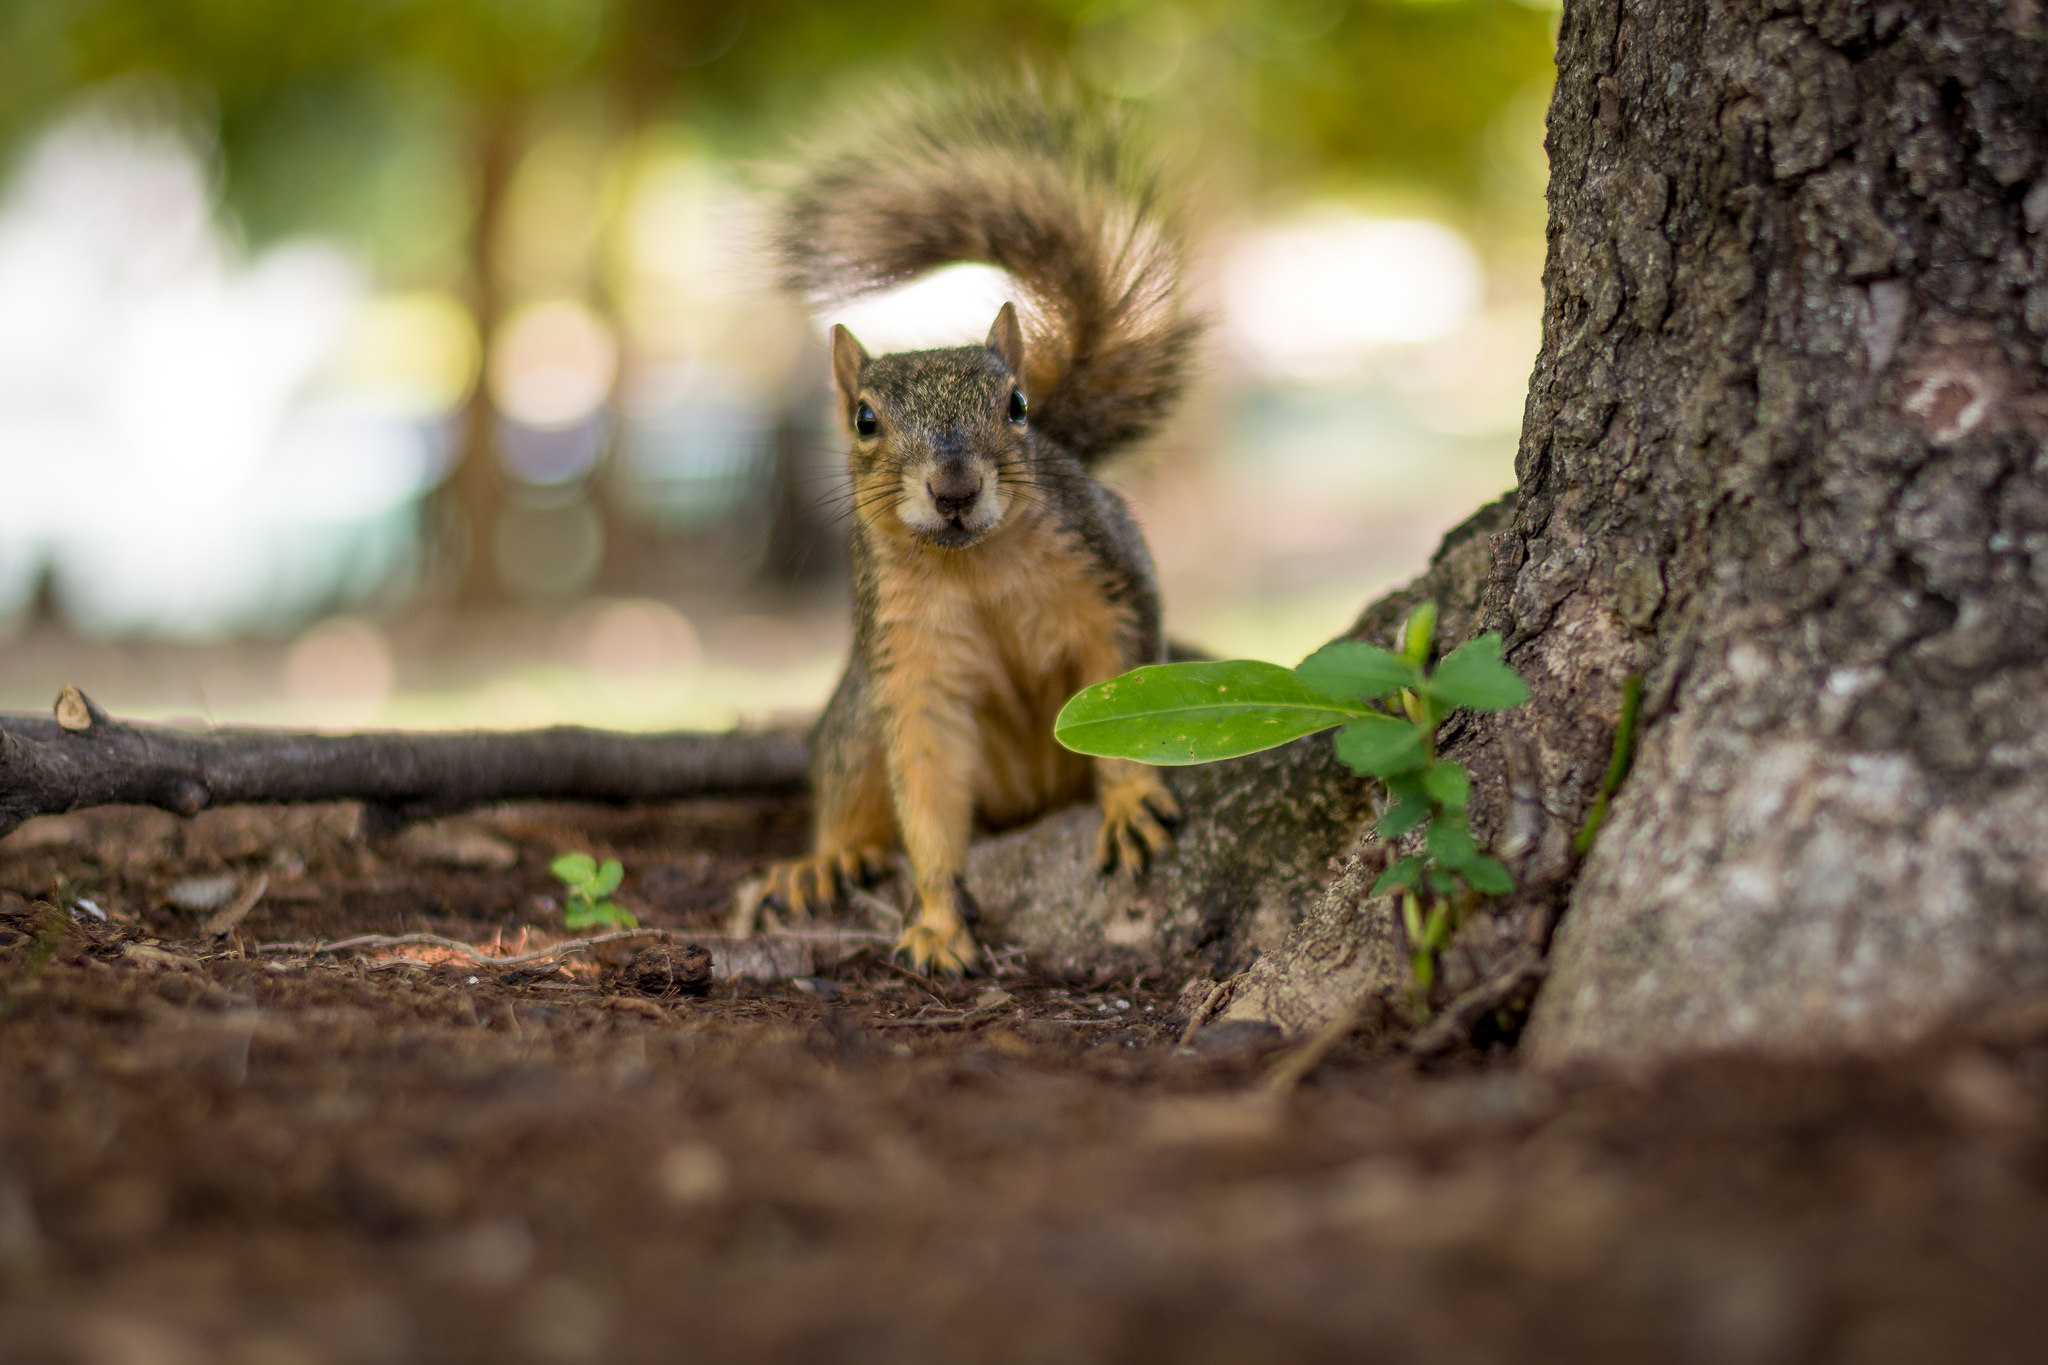 This jittery squirrel was moving all over the place, so I shot with a speed of 1/180 second to get a sharp picture. tips for getting tack sharp photos